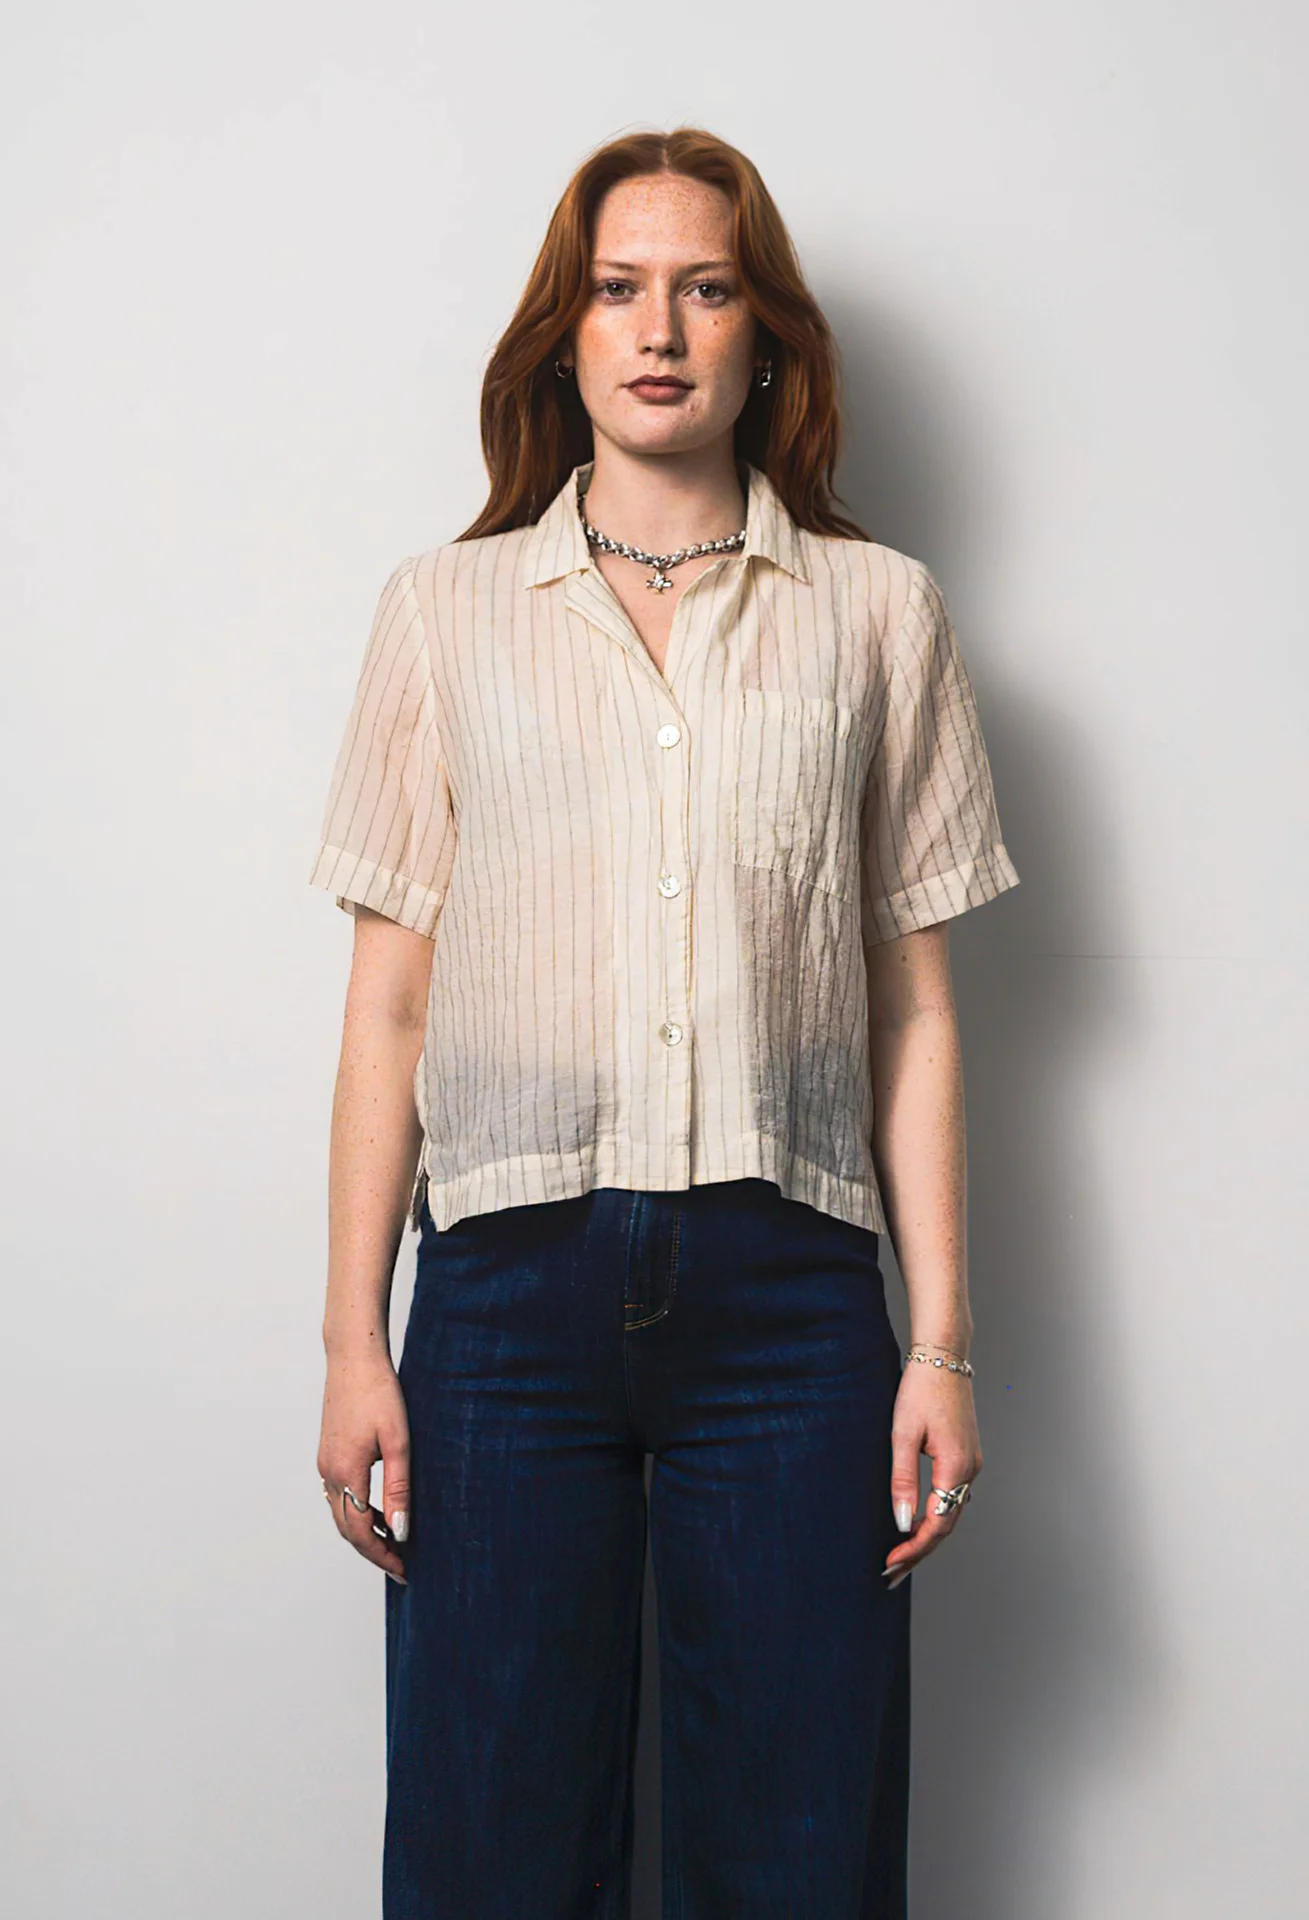 & other stories - Short Sleeved Shirt (38)